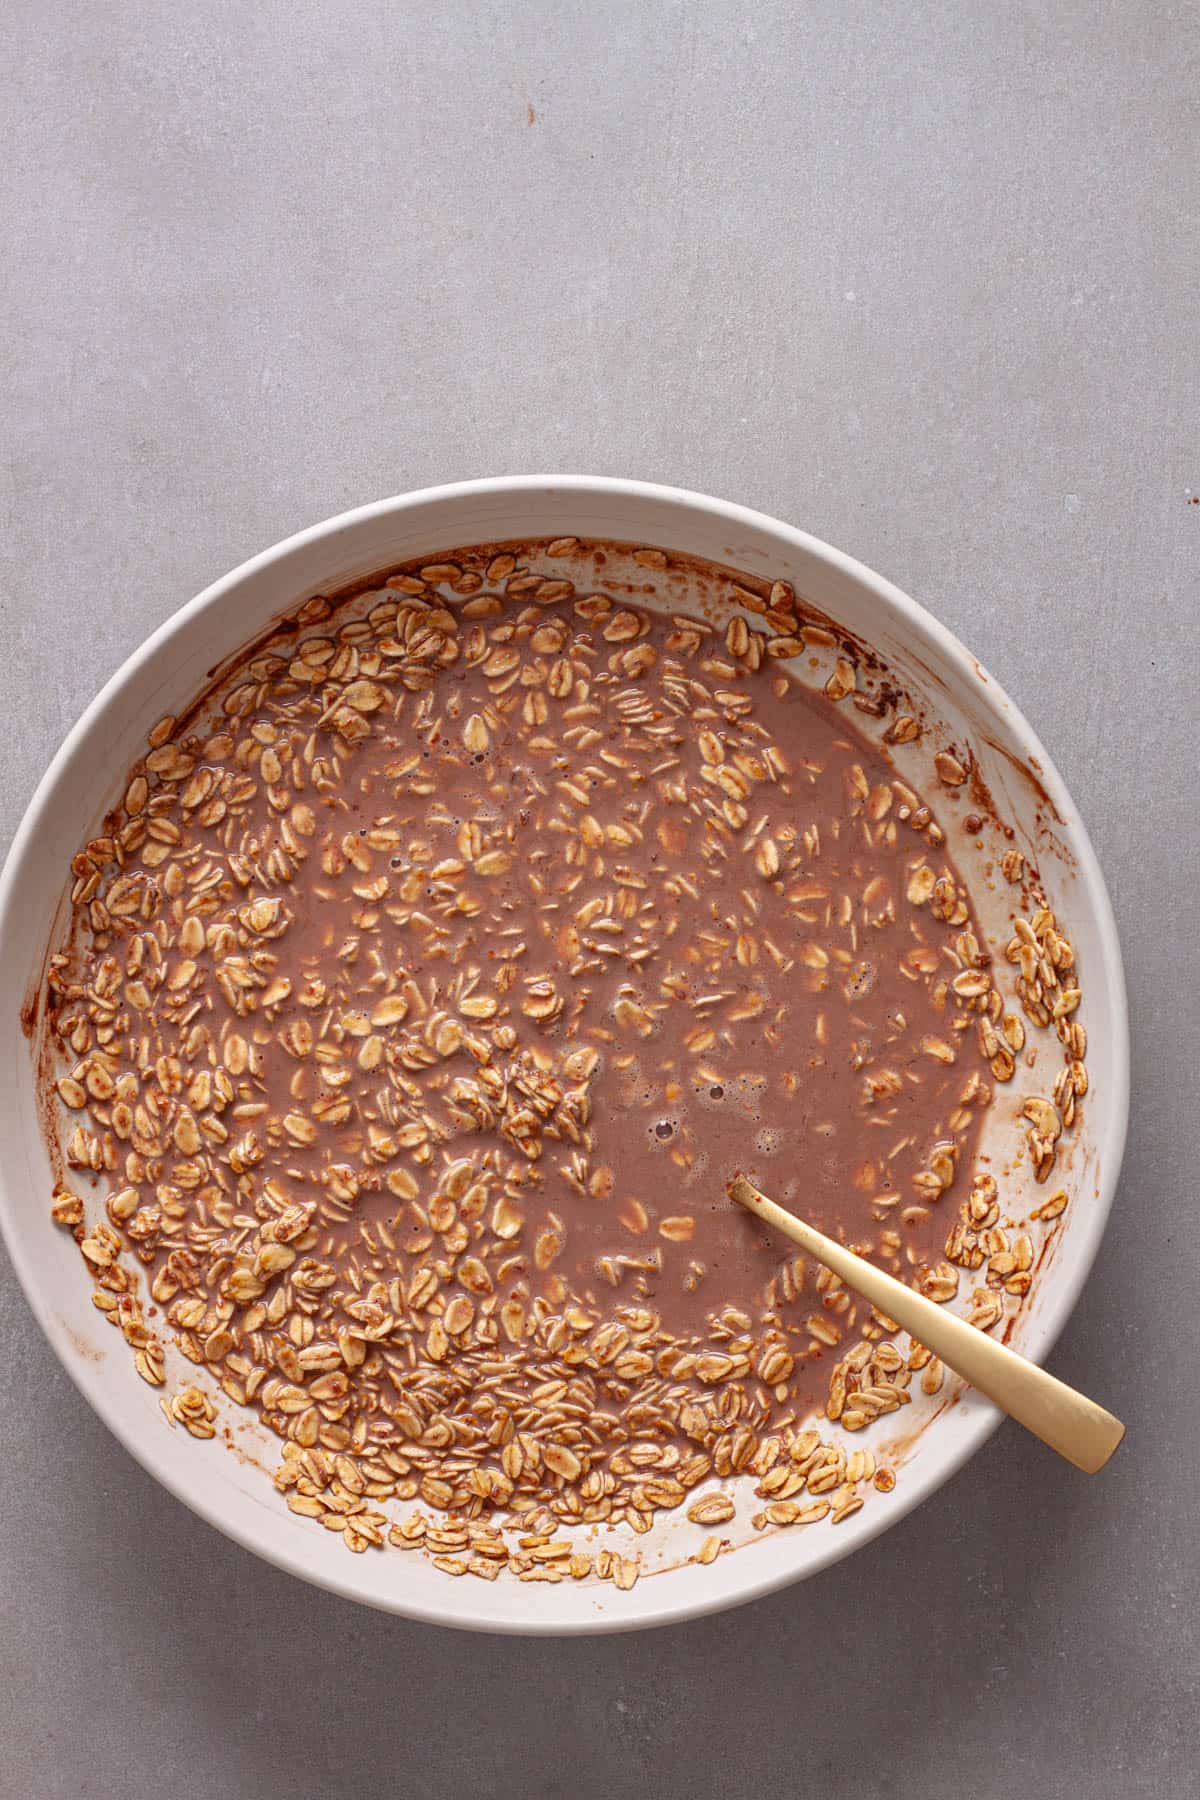 Rolled oats soaking in a chocolate milk mixture in a white bowl.